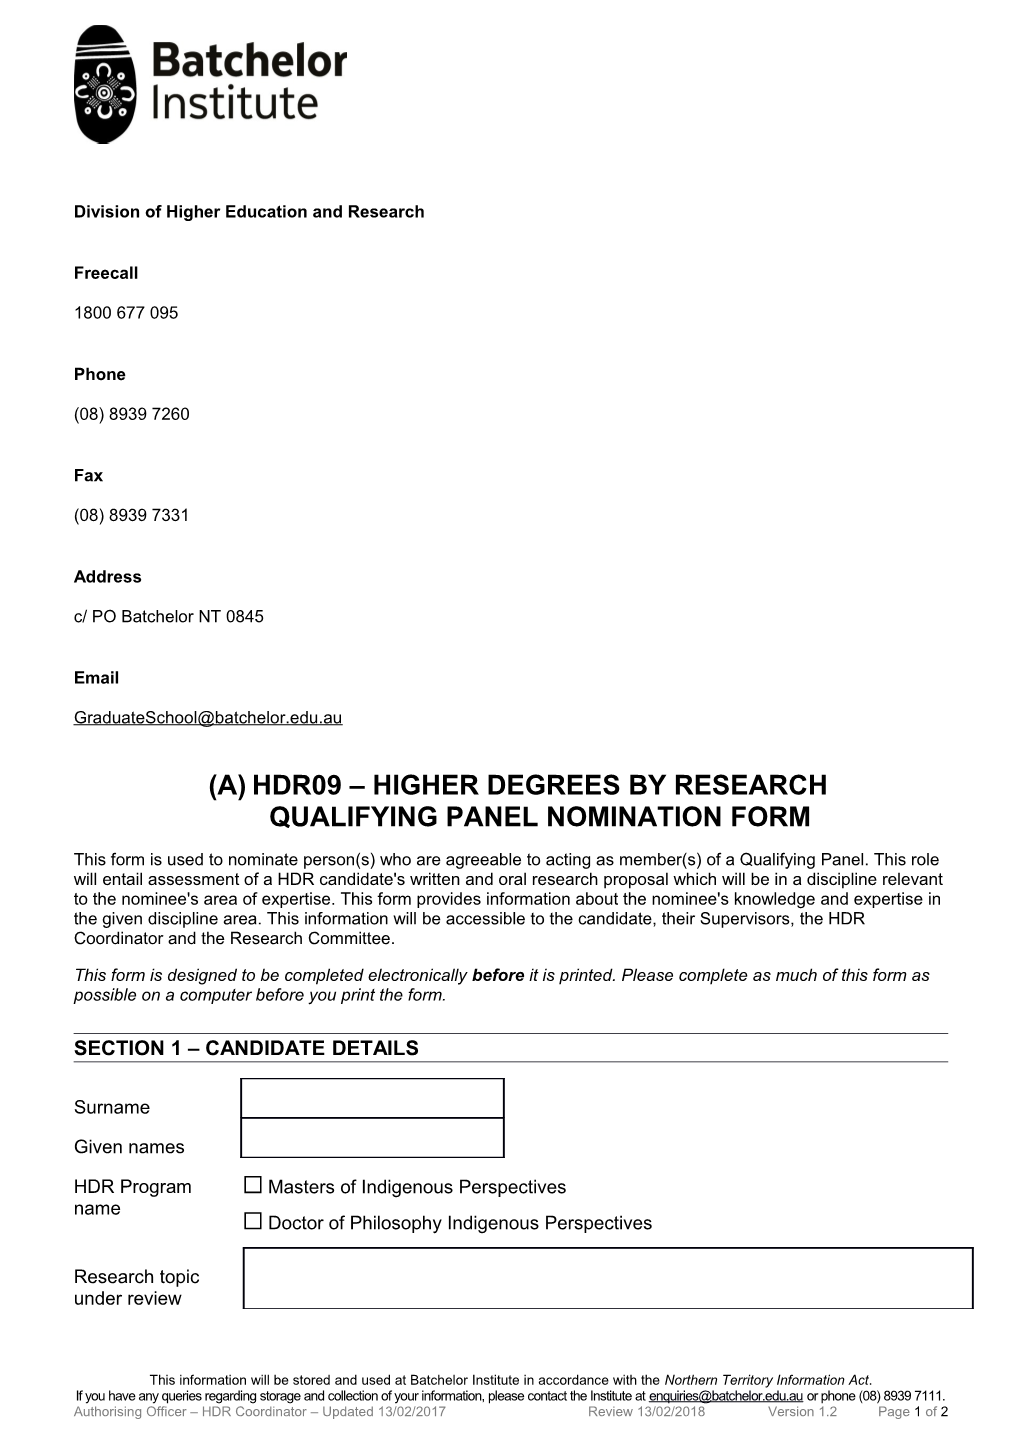 HDR09 Higher Degrees by Researchqualifying Panel Nomination Form